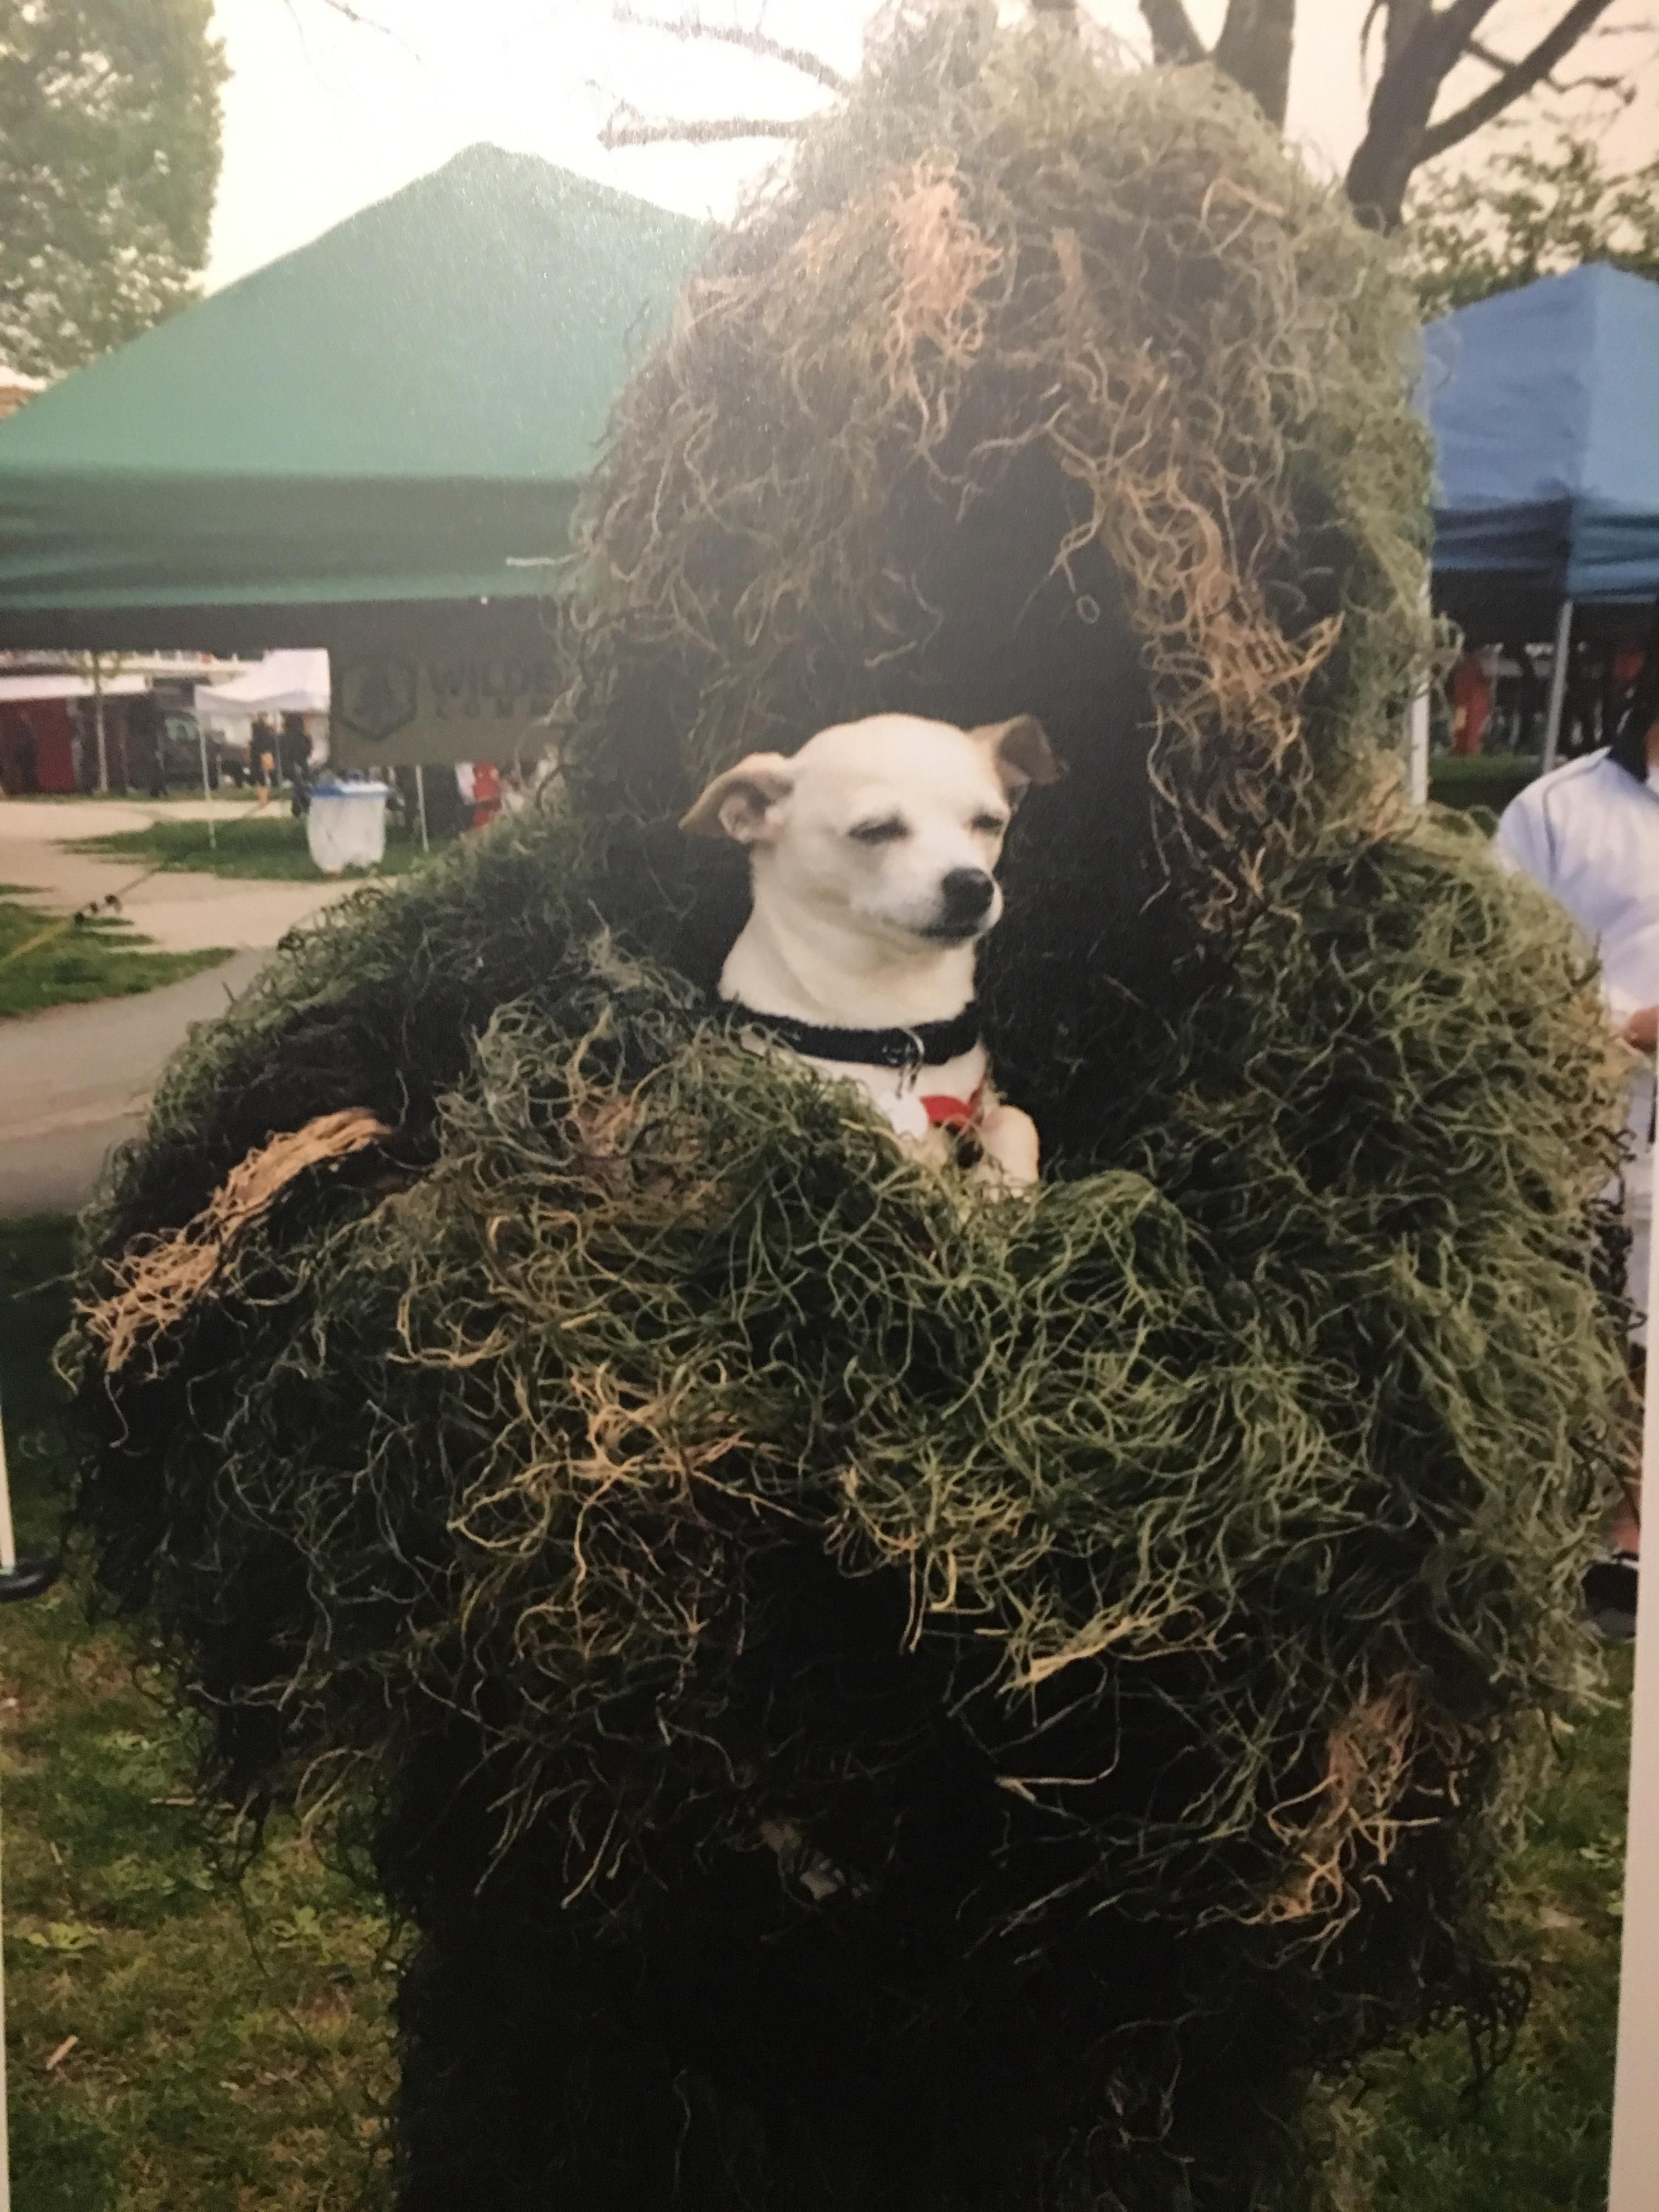 My son dressed up like this for a parade. No-one knew who he was, except the dog.